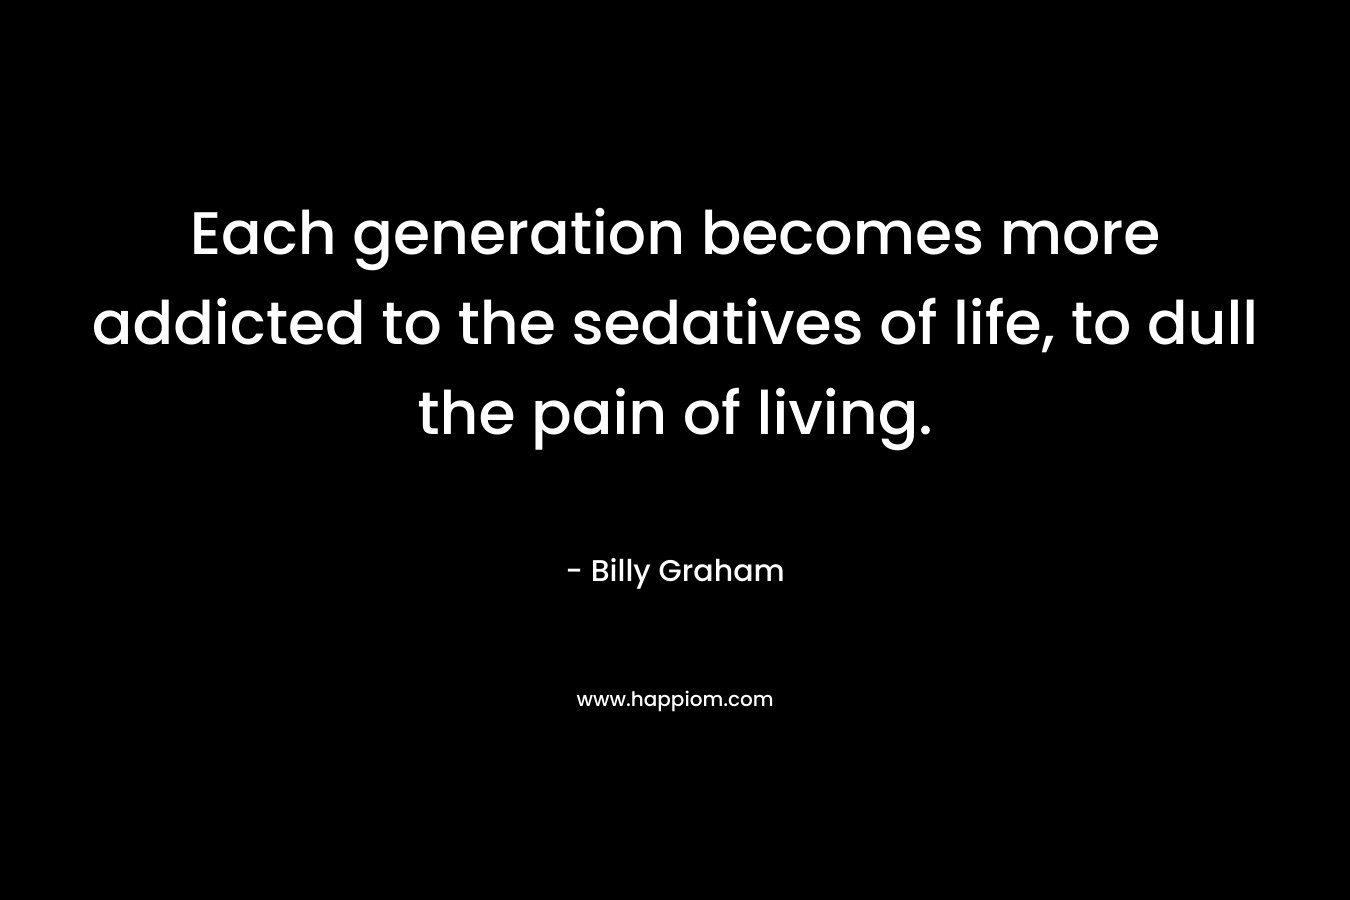 Each generation becomes more addicted to the sedatives of life, to dull the pain of living. – Billy Graham